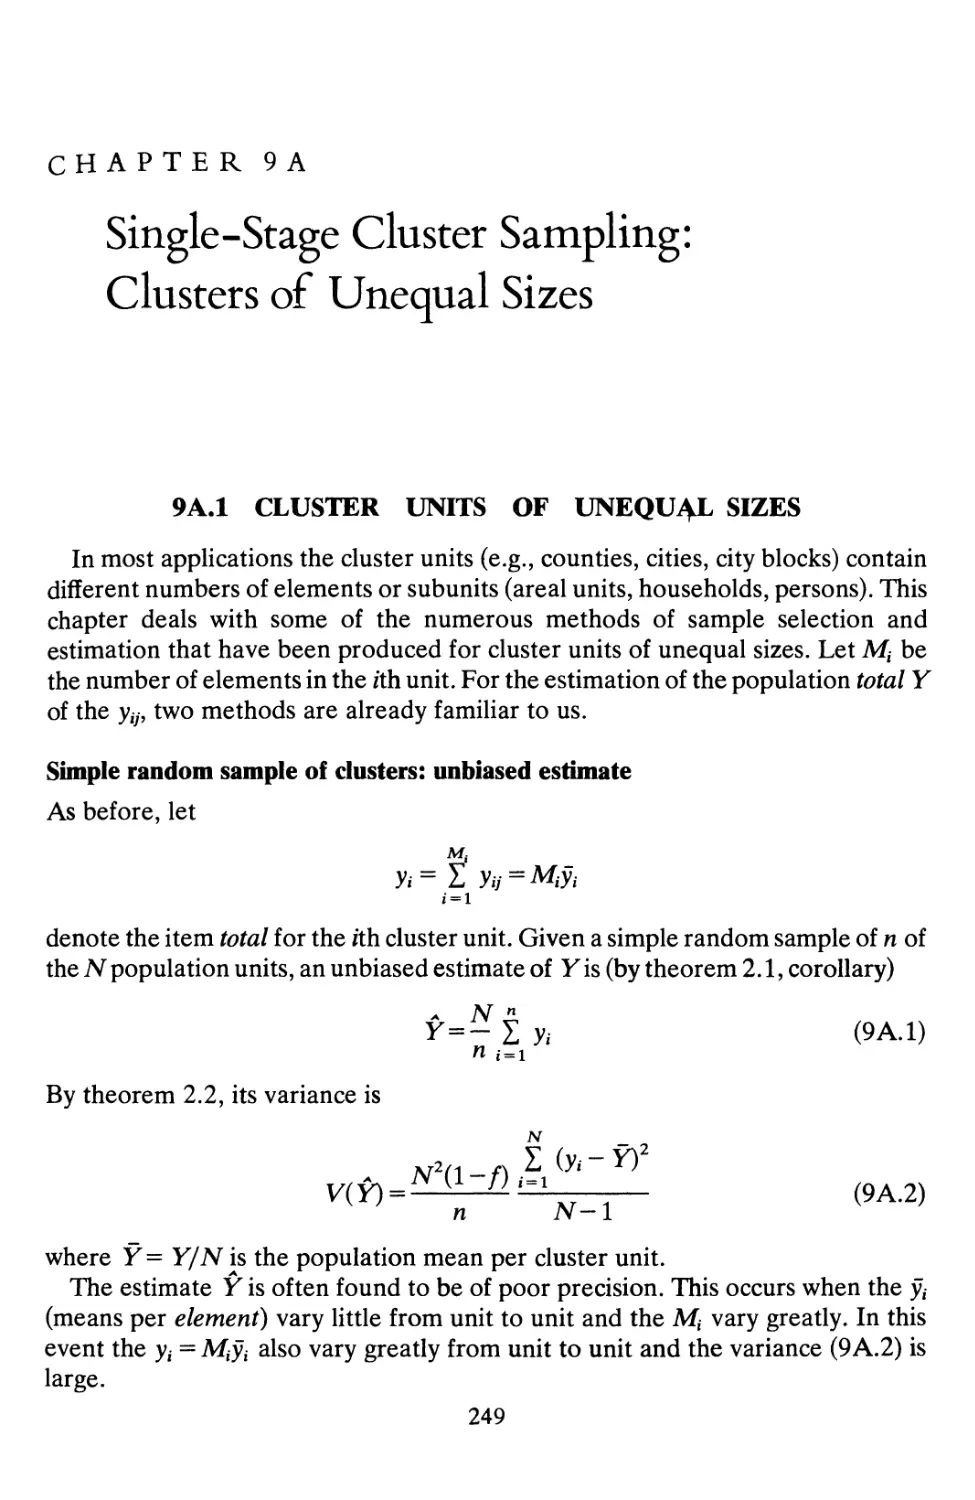 9A Single-Stage Cluster Sampling: Clusters of Unequal Sizes